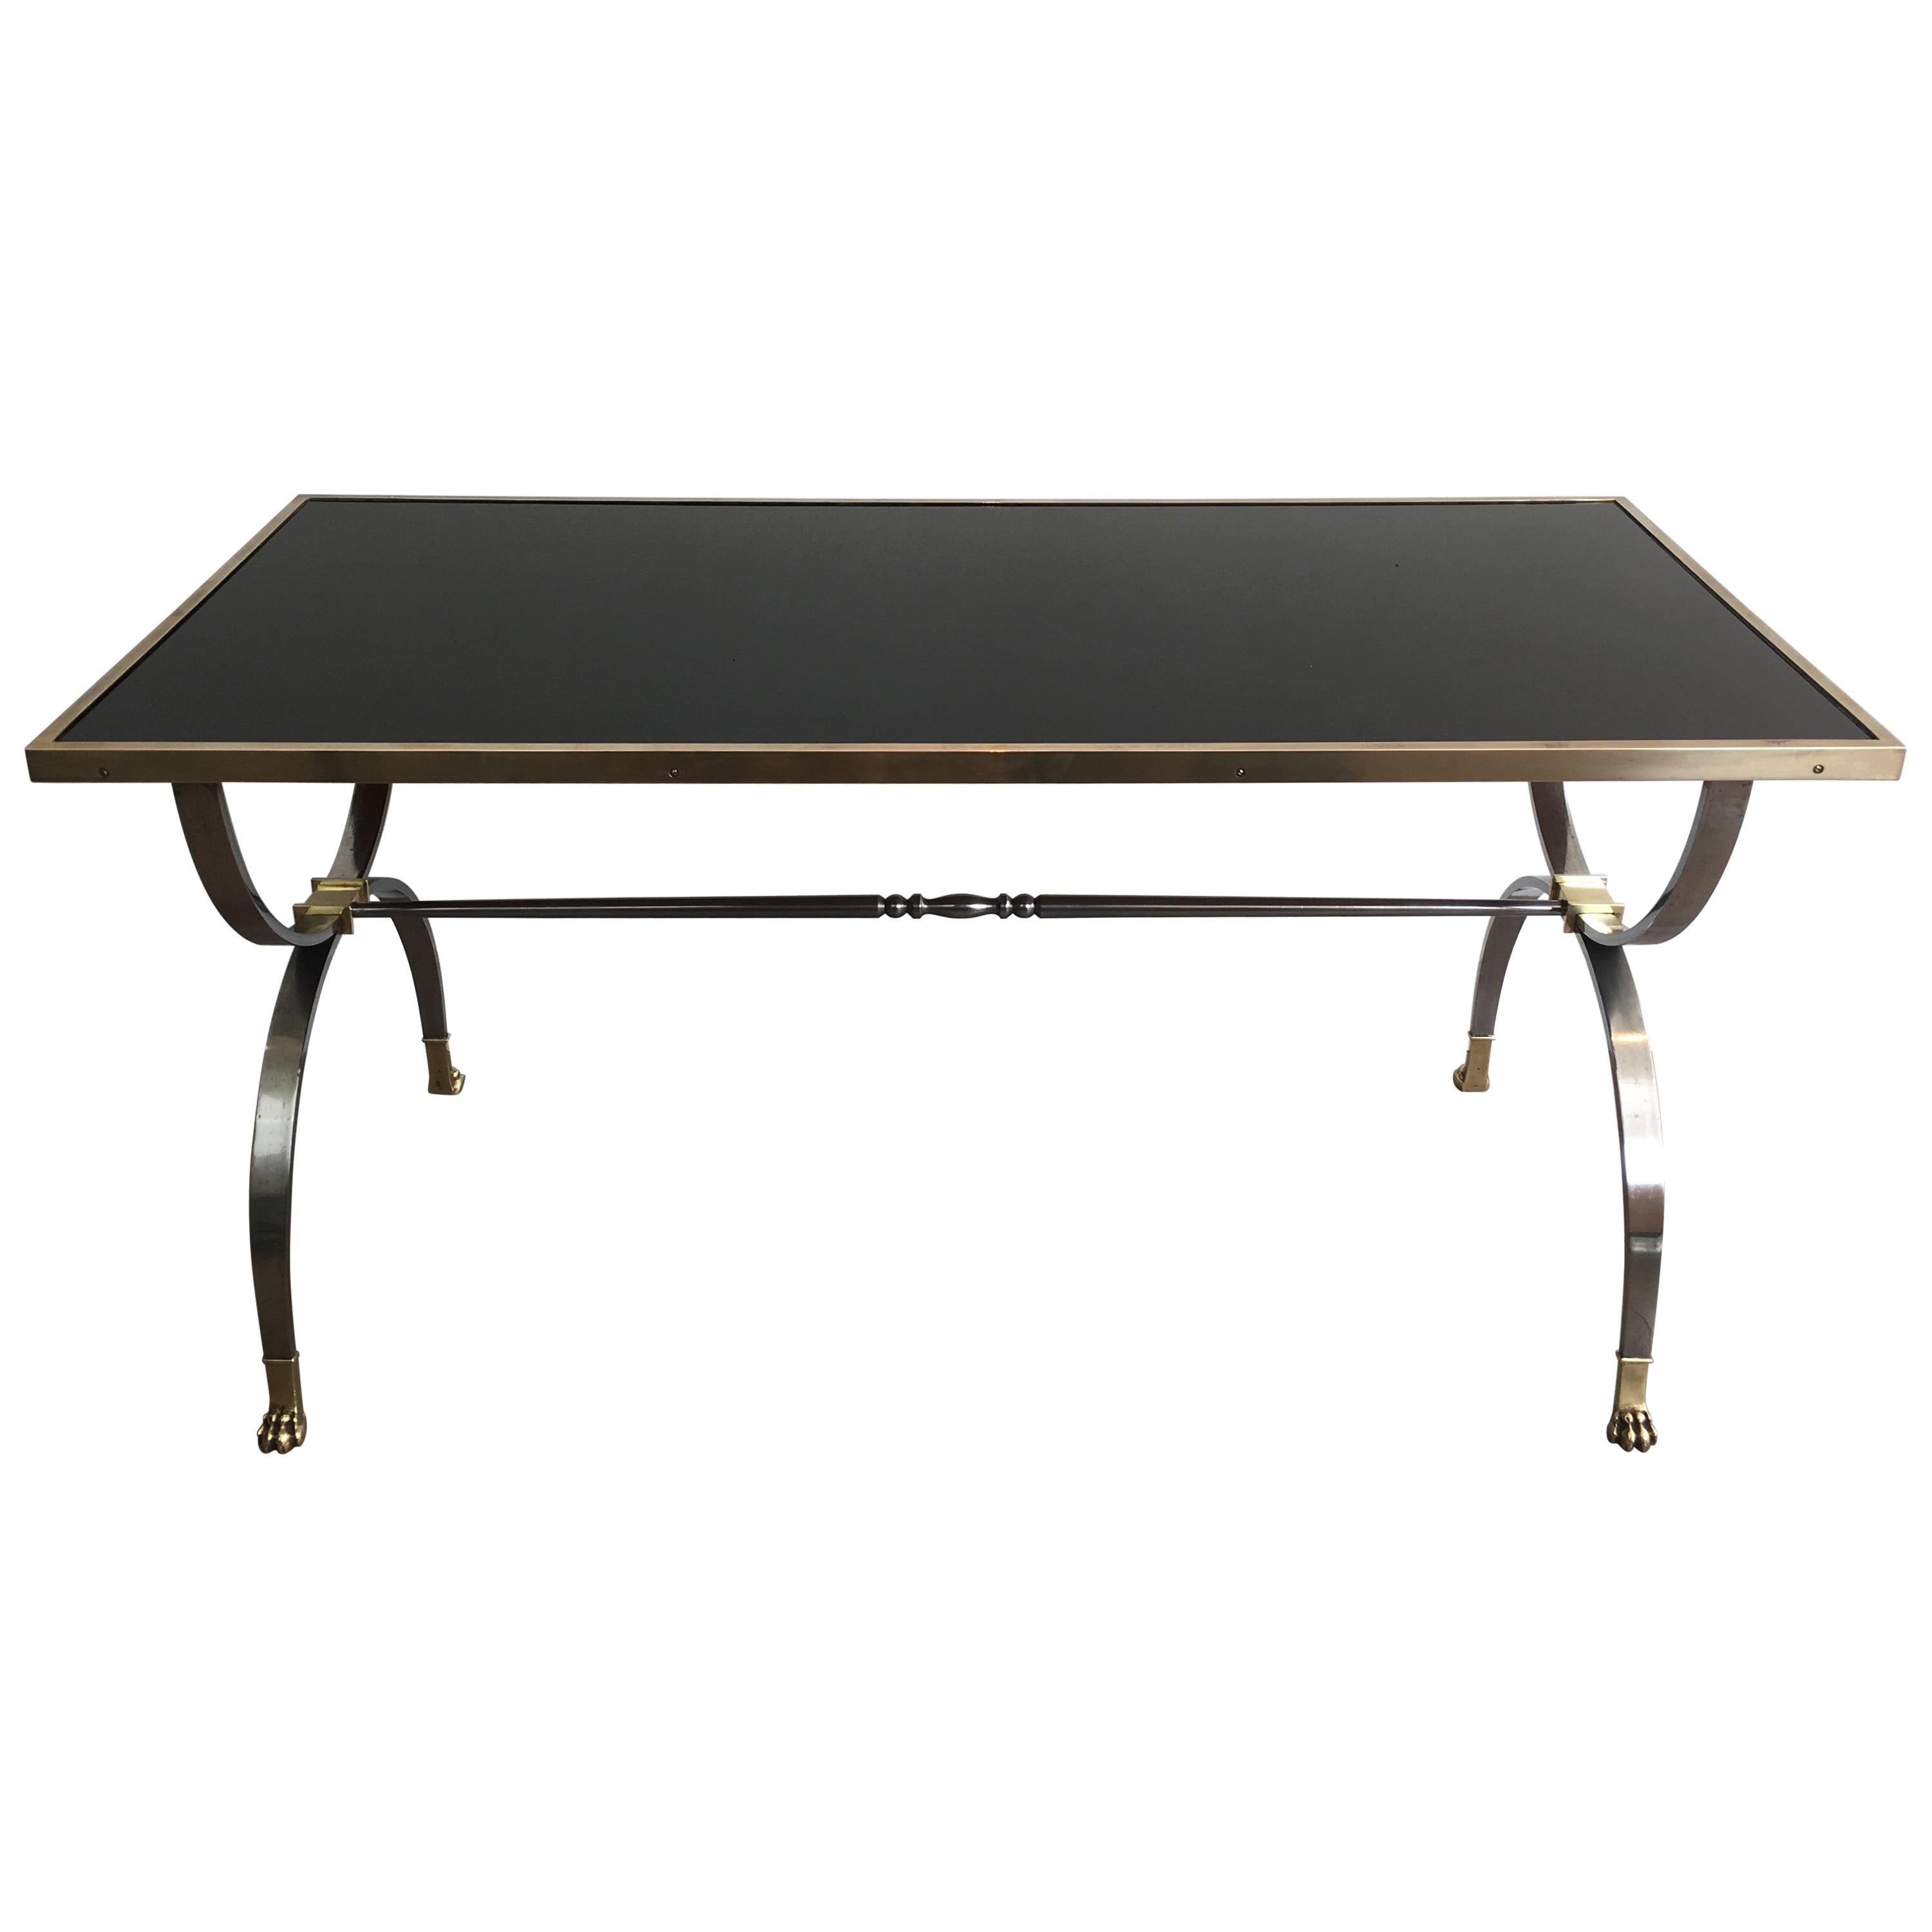 Maison Jansen, Rare Brushed Steel and Brass Neoclassical Style Coffee Table